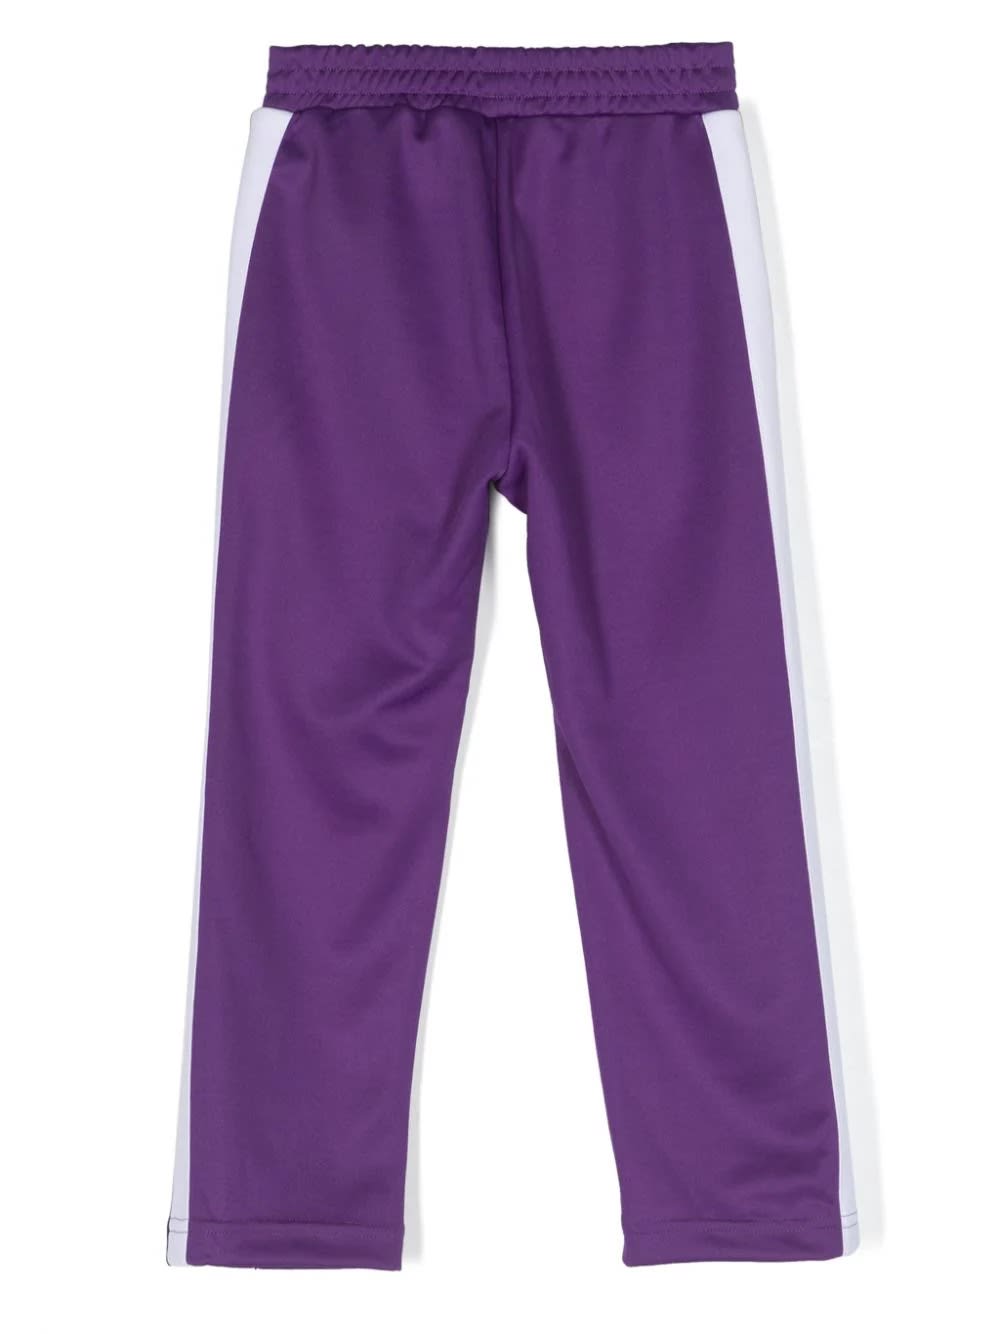 Shop Palm Angels Purple Track Trousers With Logo